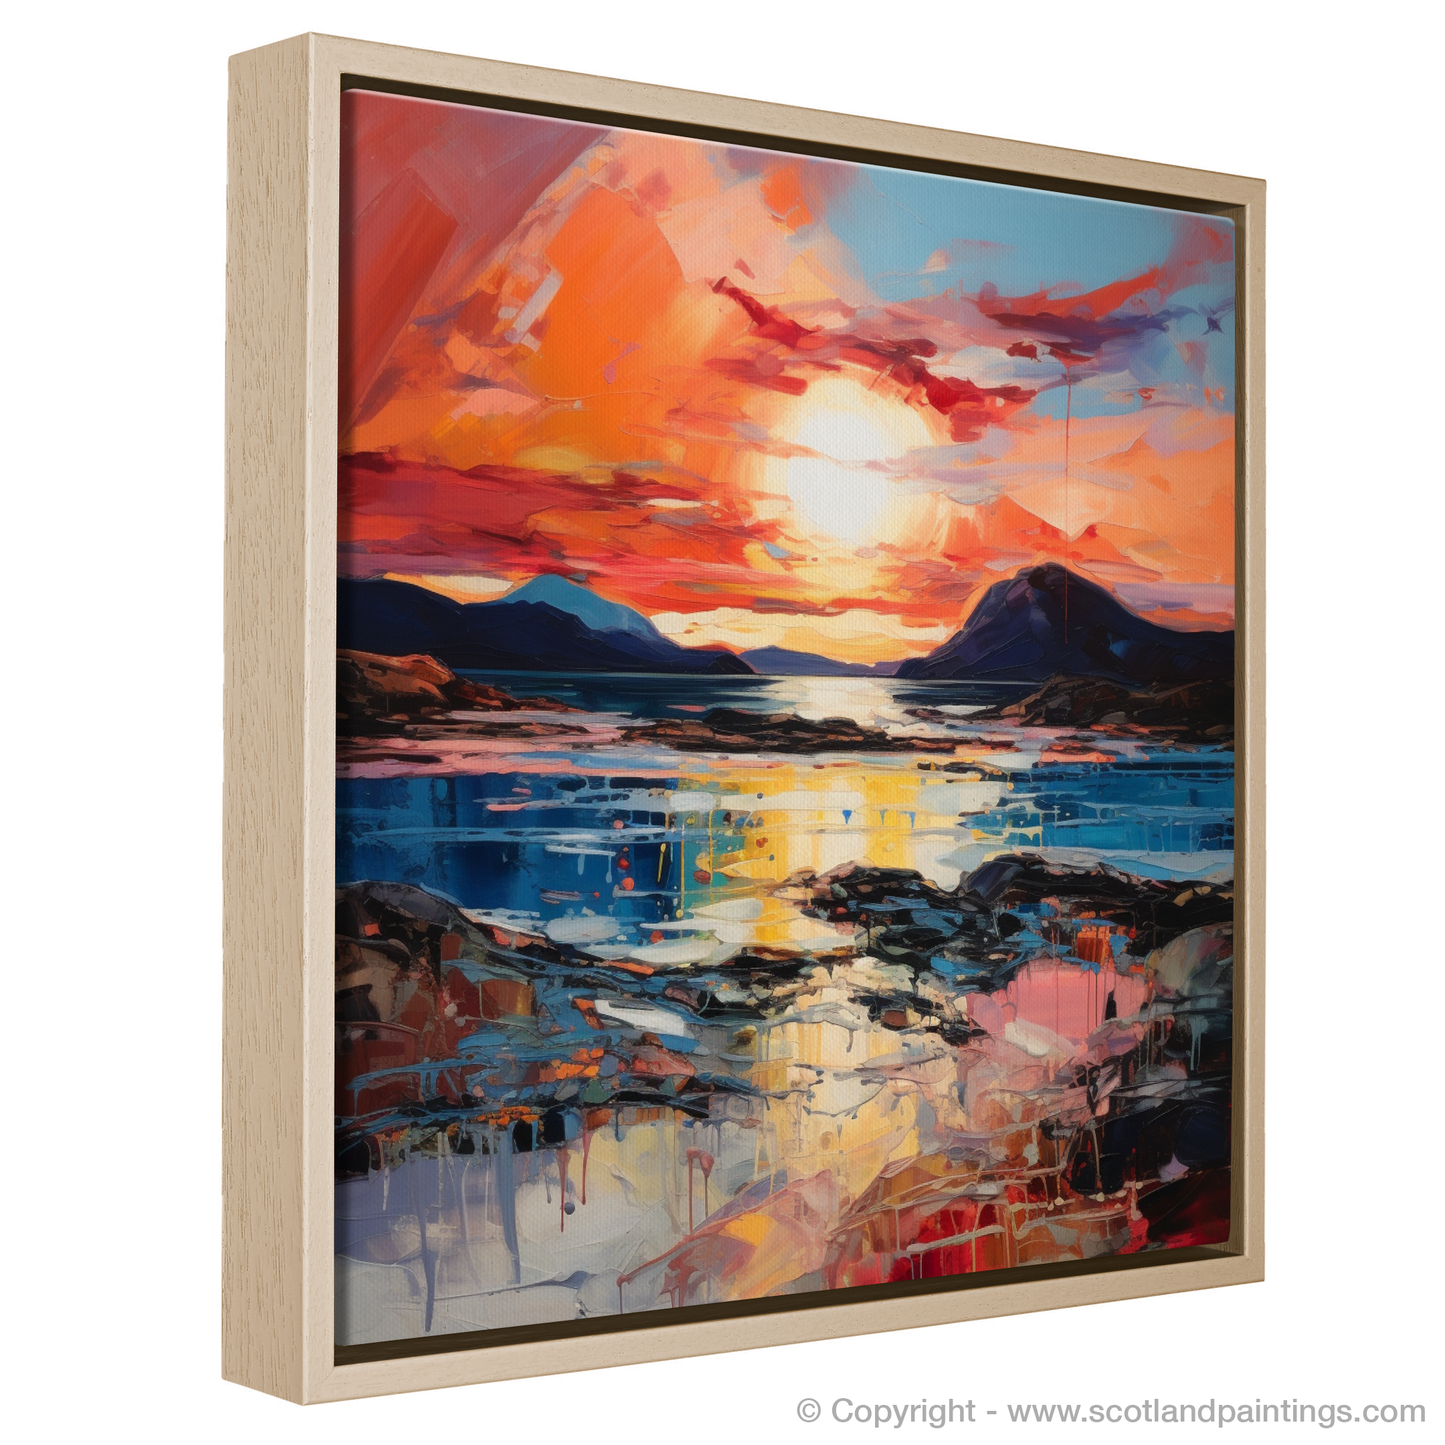 Painting and Art Print of Ardtun Bay at sunset entitled "Ardtun Bay Sunset Reflections".